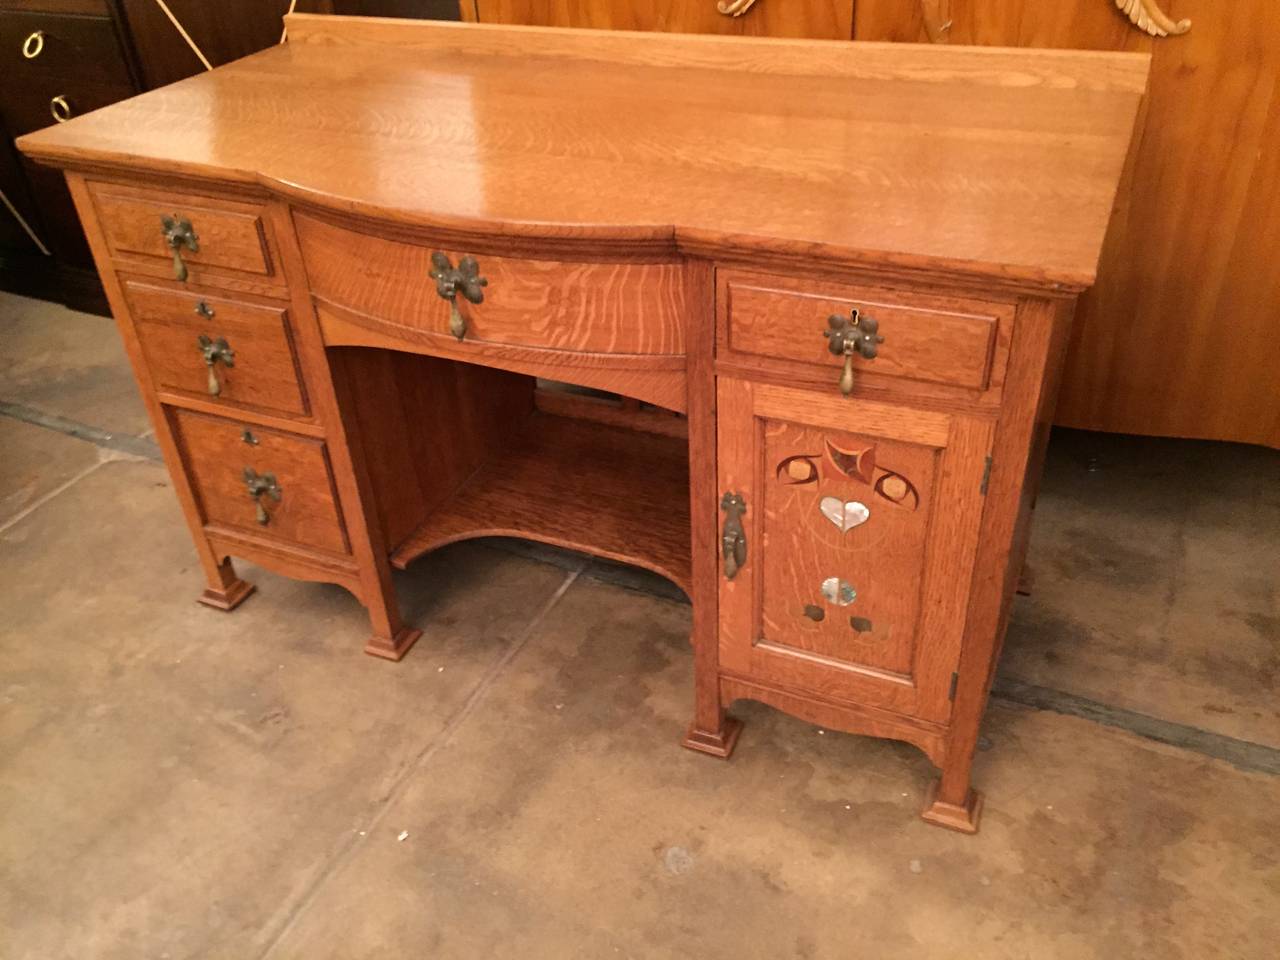 A wonderful small desk or cabinet in golden oak with mother-of-pearl inlays and brass tear drop pulls by the Famed Arts and Crafts company, Shapland and Petter. Maker's mark.